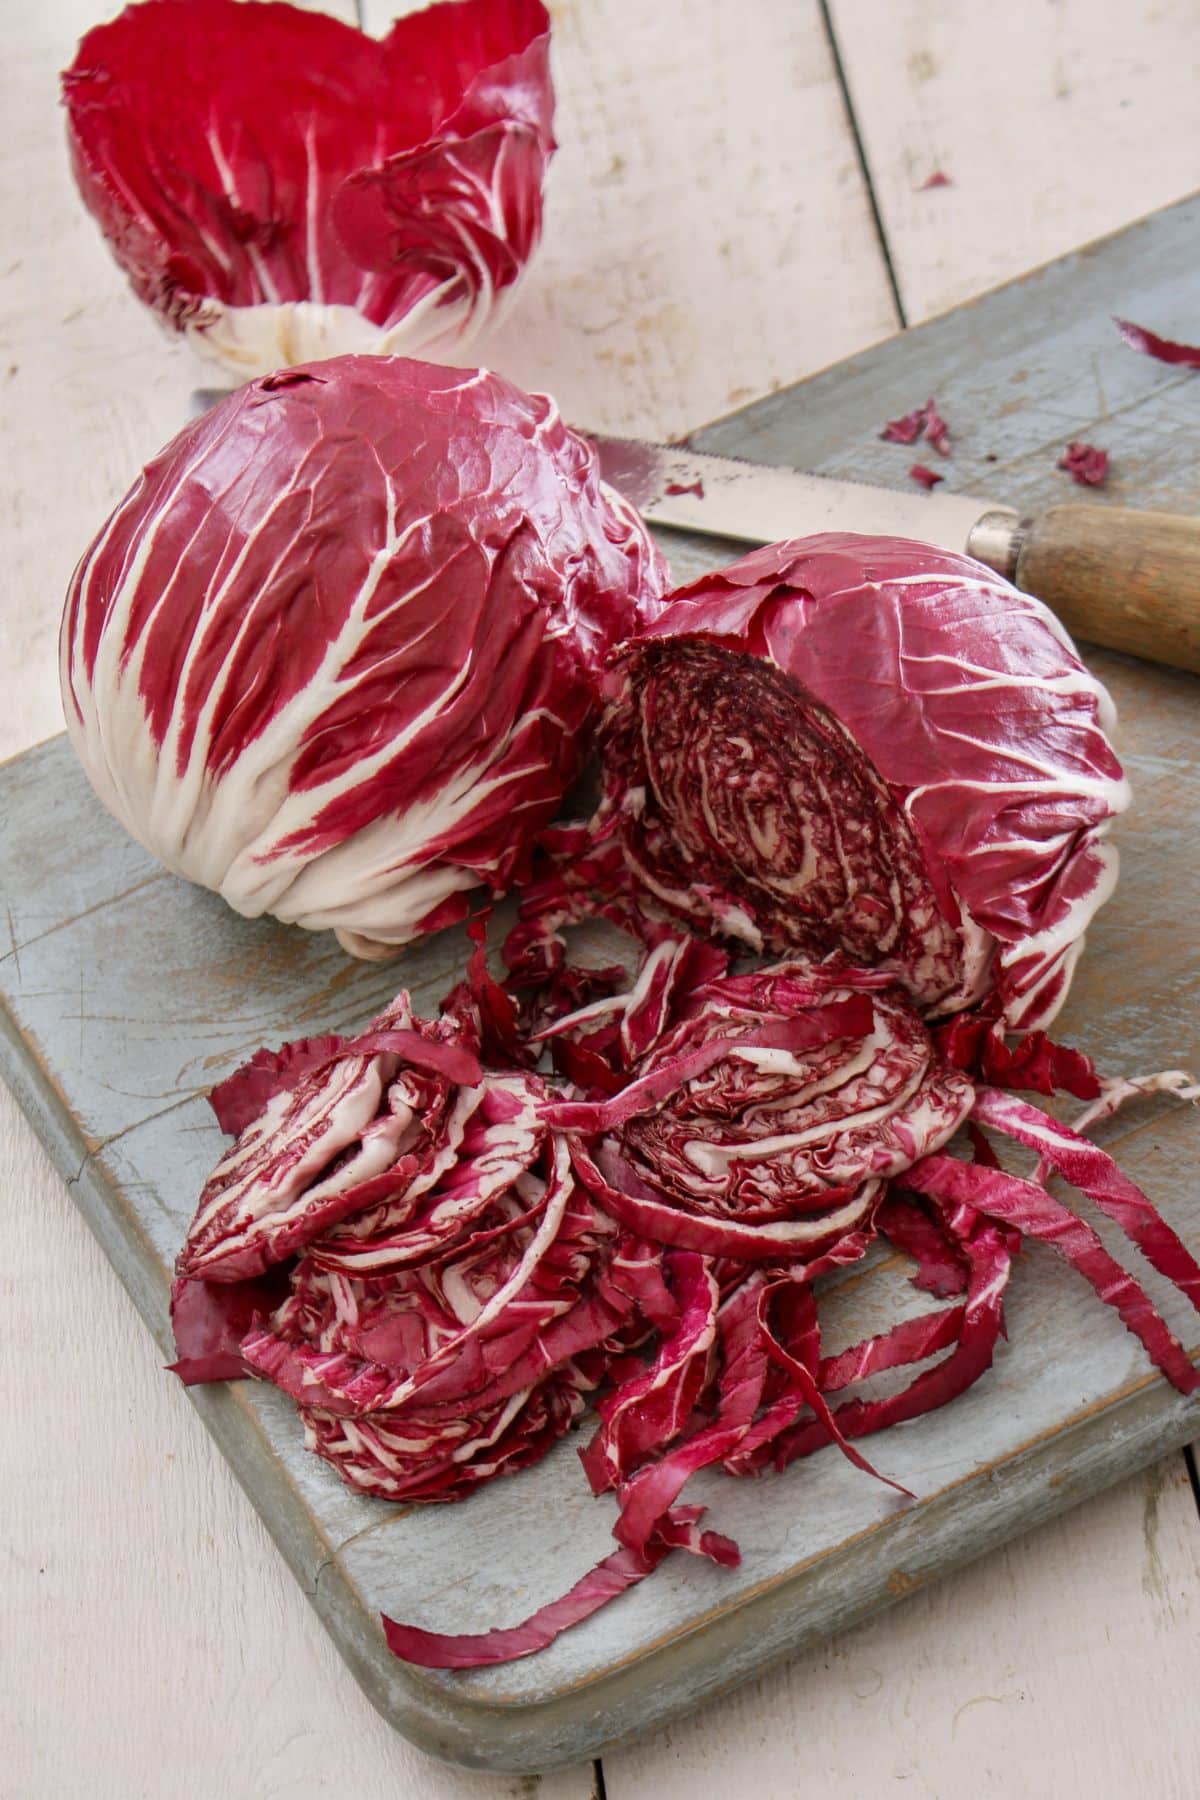 Halved and whole radicchio on wooden cutting board.